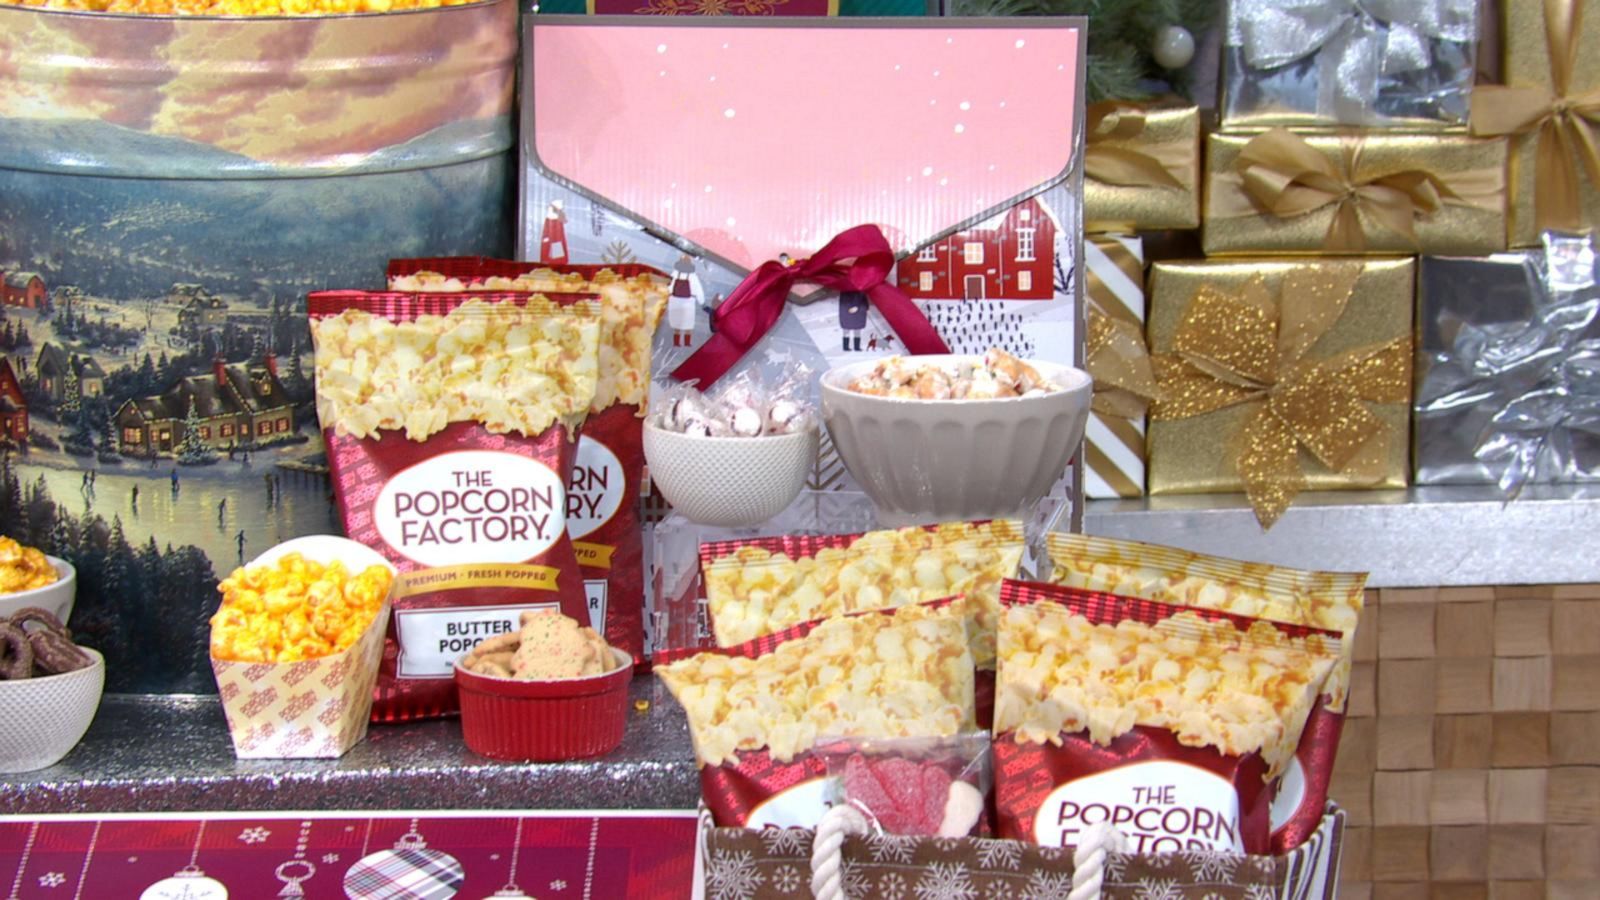 GMA' Deals & Steals on gifts for everyone on your list - Good Morning  America